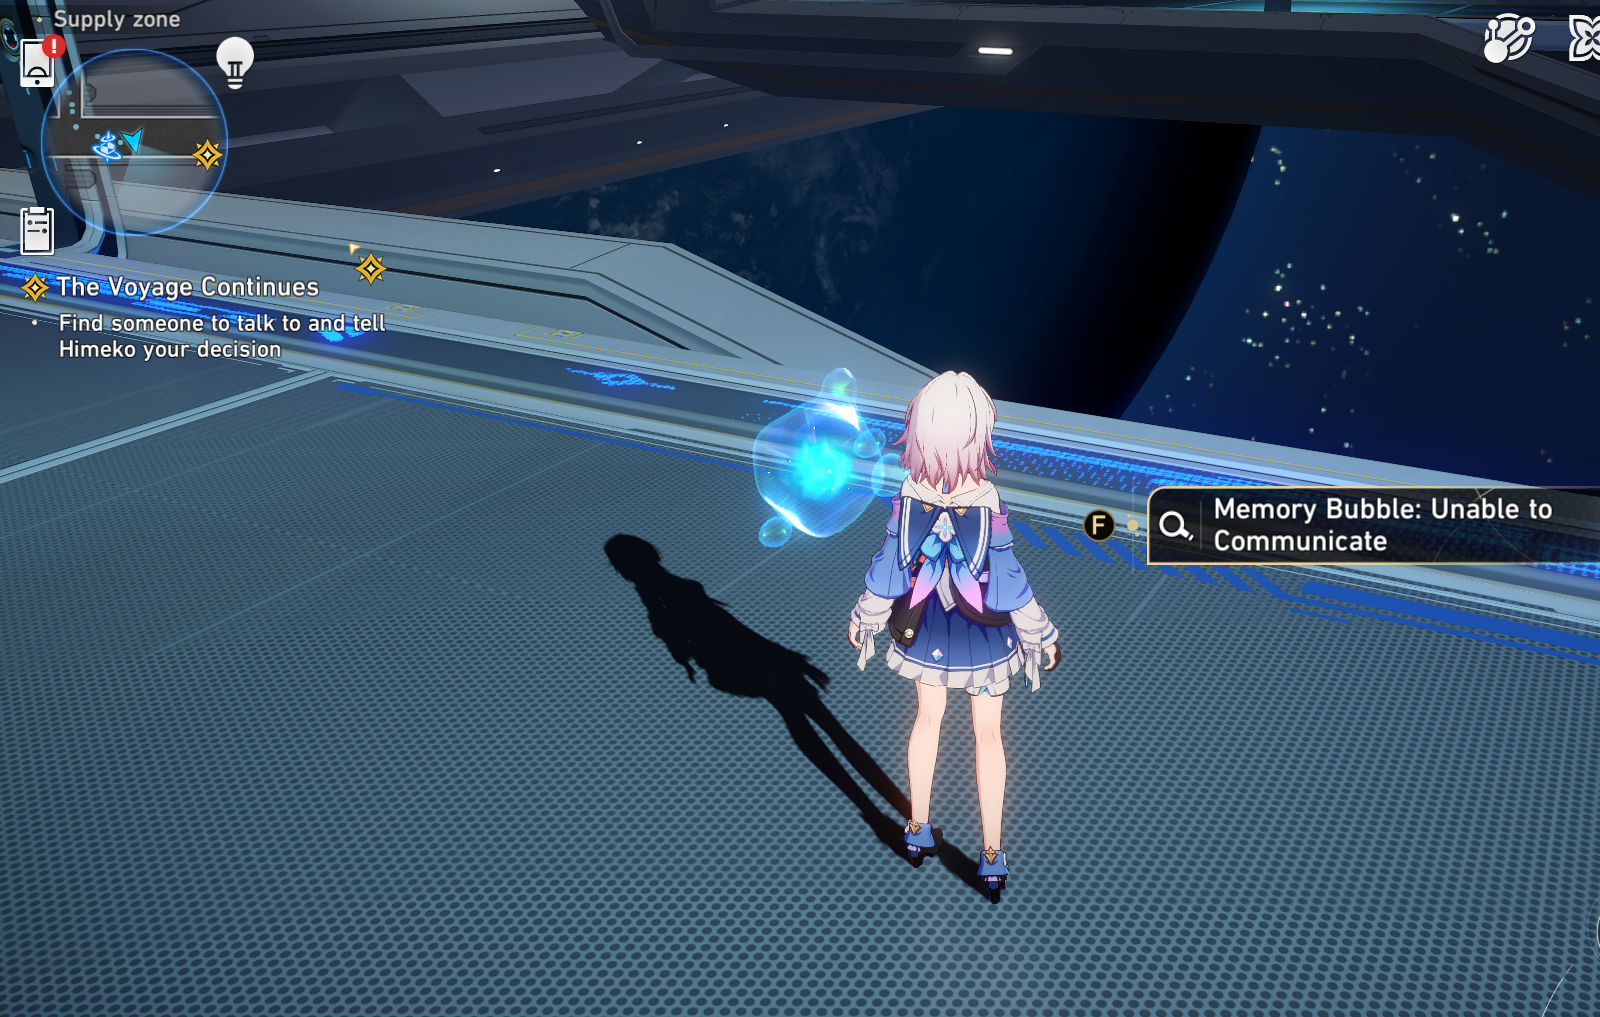 How to use Memory Bubbles in Honkai Star Rail: All Locations